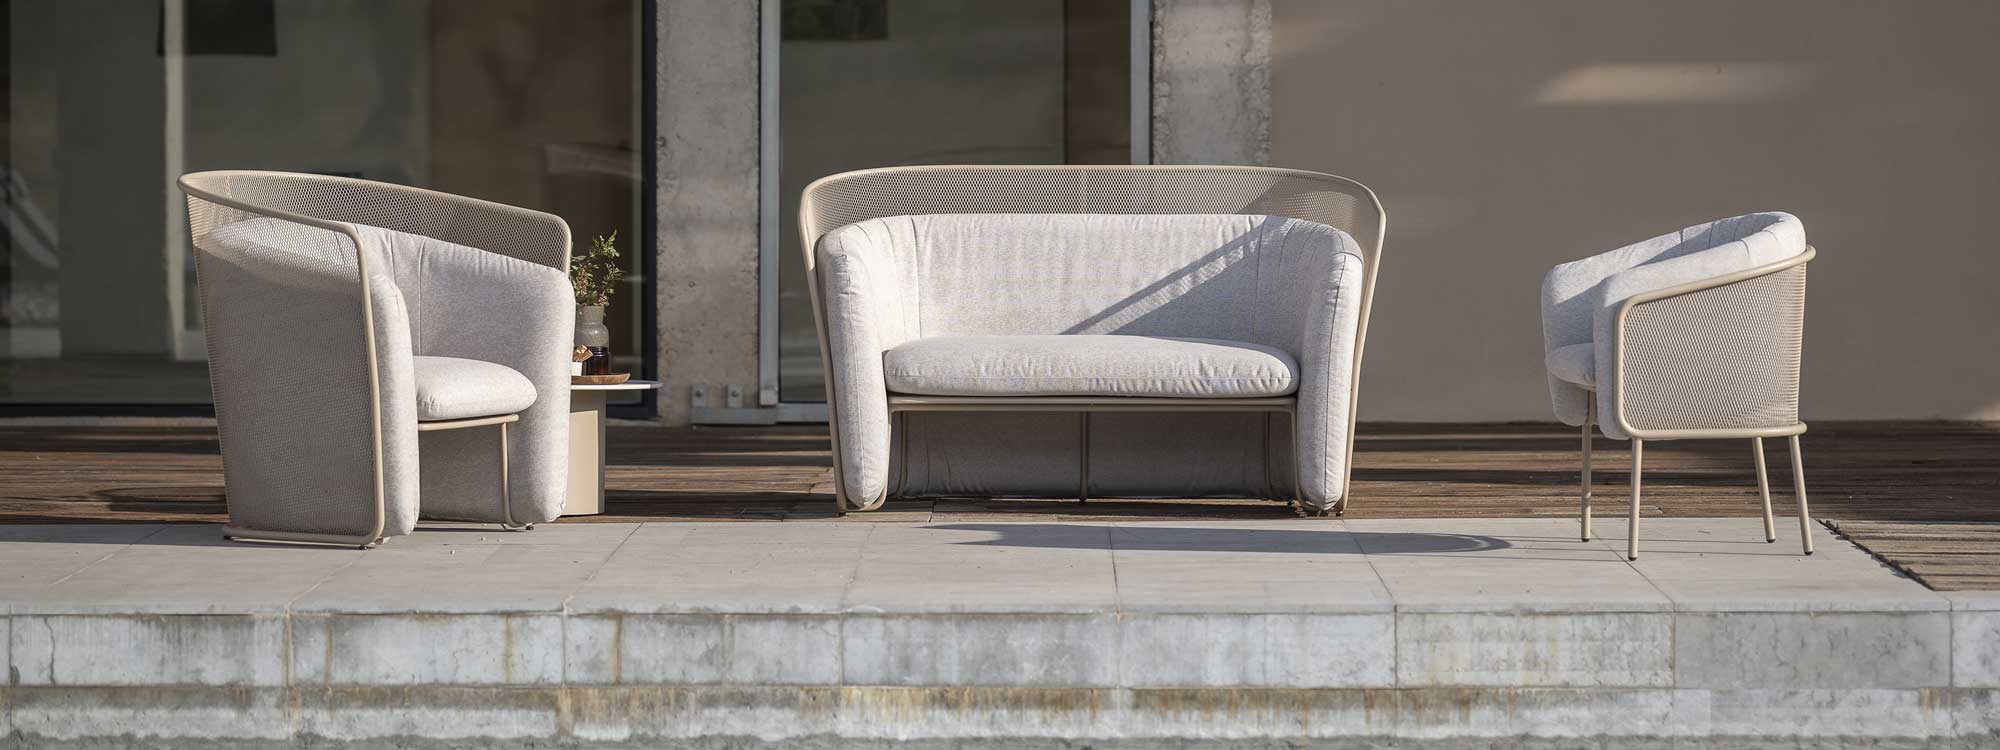 Image of Slide modern 2 seat garden sofa and lounge chairs in Latte colour finish by Todus